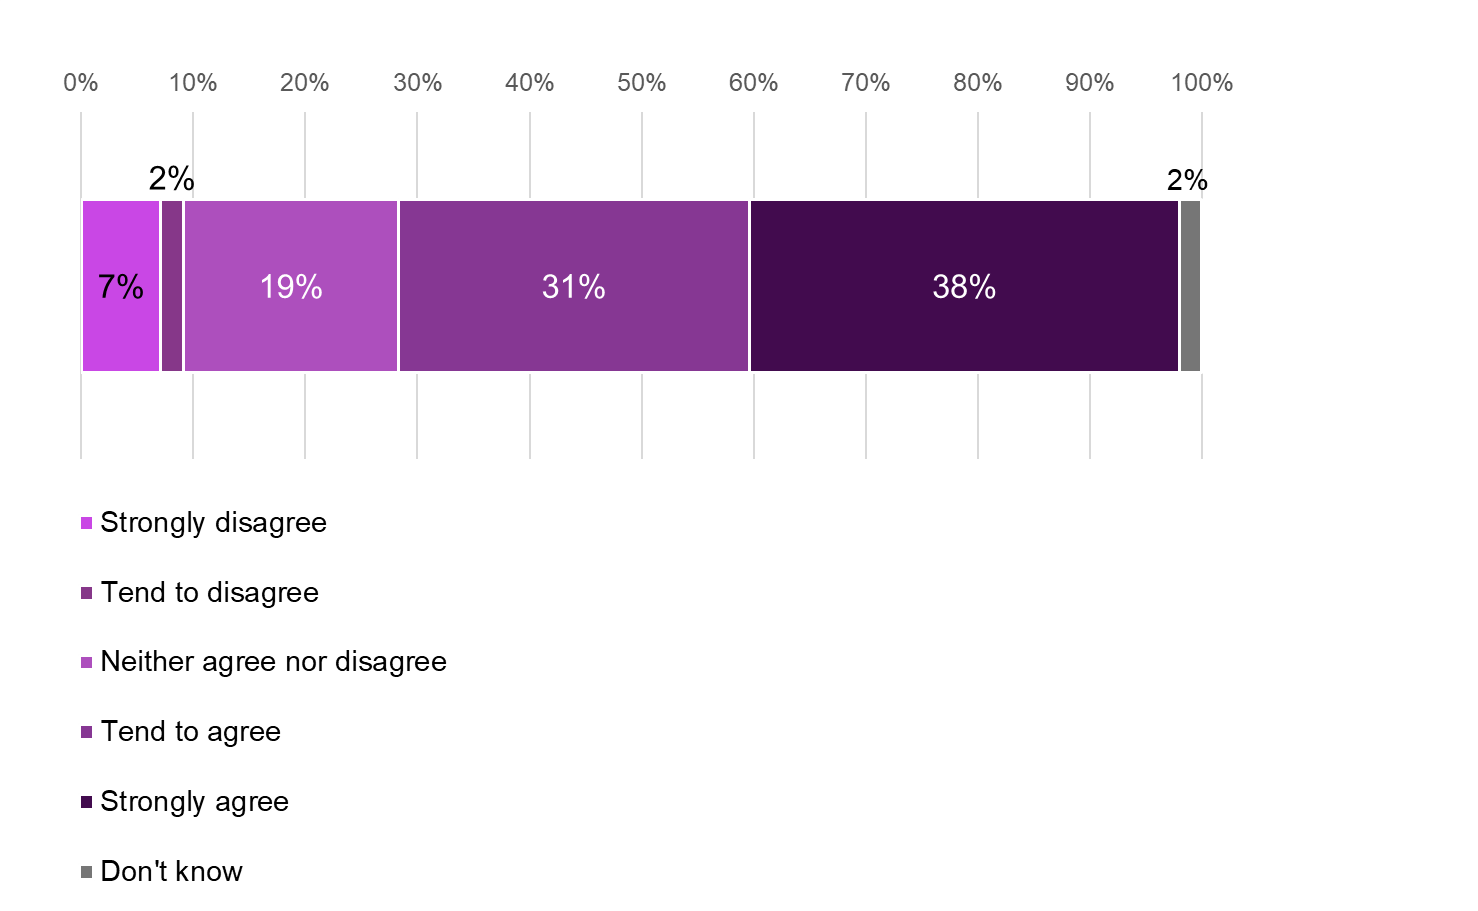 This chart shows that the majority of survey participants from 2020 cohort agreed that FSS had a positive impact on their wellbeing. 38% strongly agreed that FSS had a positive impact on their wellbeing and 31% tended to agree that FSS had a positive impact. 21% disagreed with the statement that FSS had a positive impact on their wellbeing. 